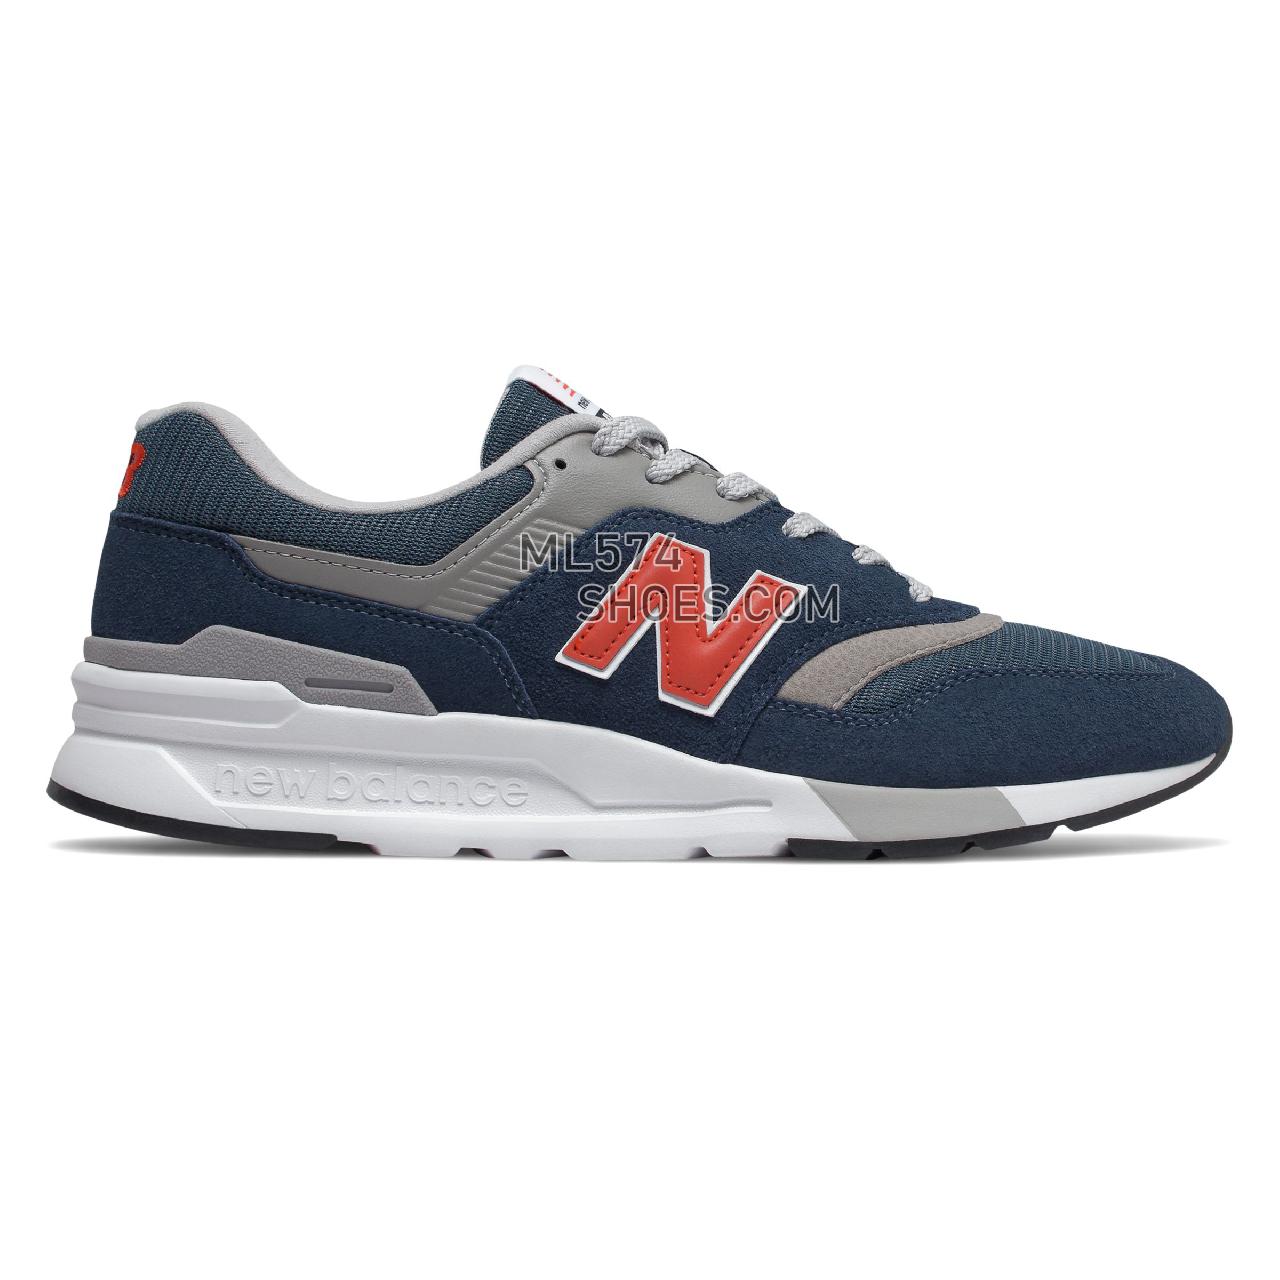 New Balance 997H - Men's Classic Sneakers - Natural Indigo with Neo Flame - CM997HAY